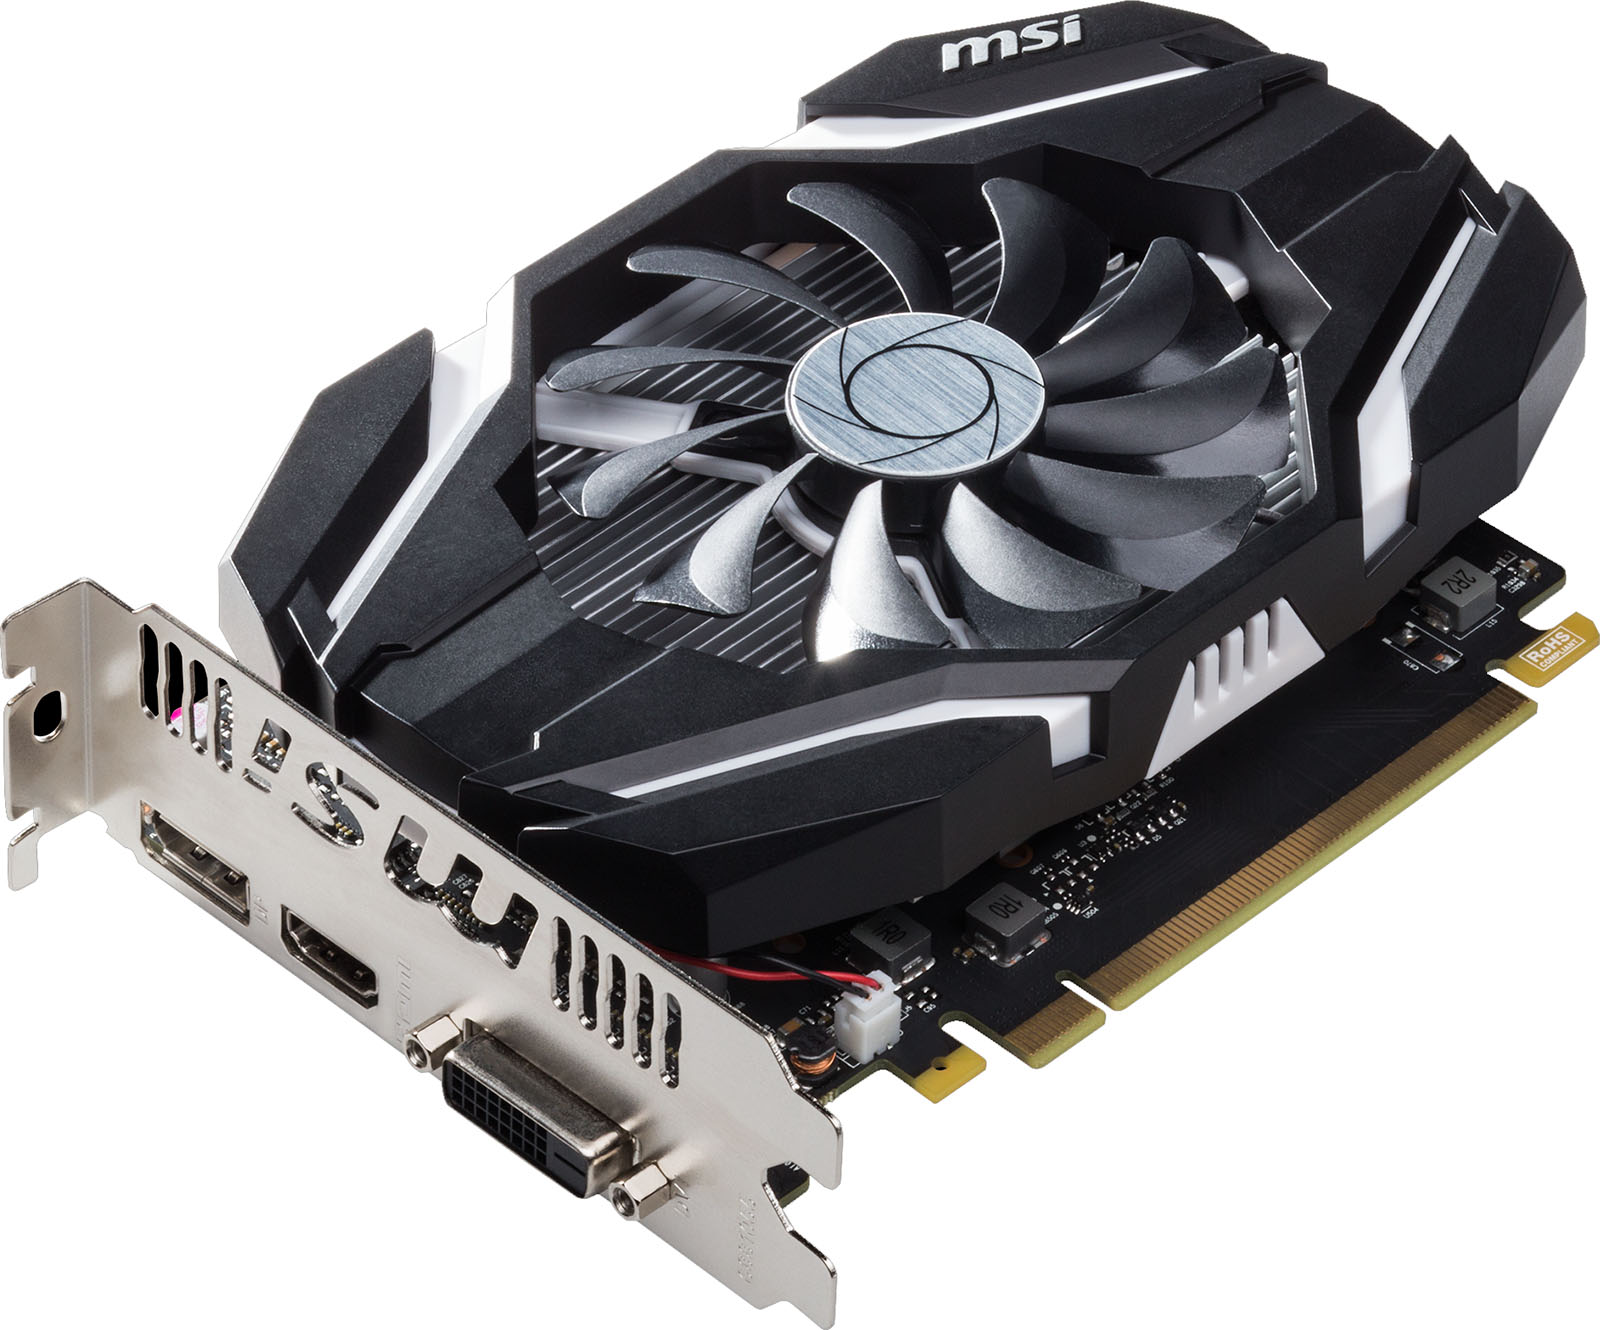 Special offer > gtx 150, Up to 63% OFF